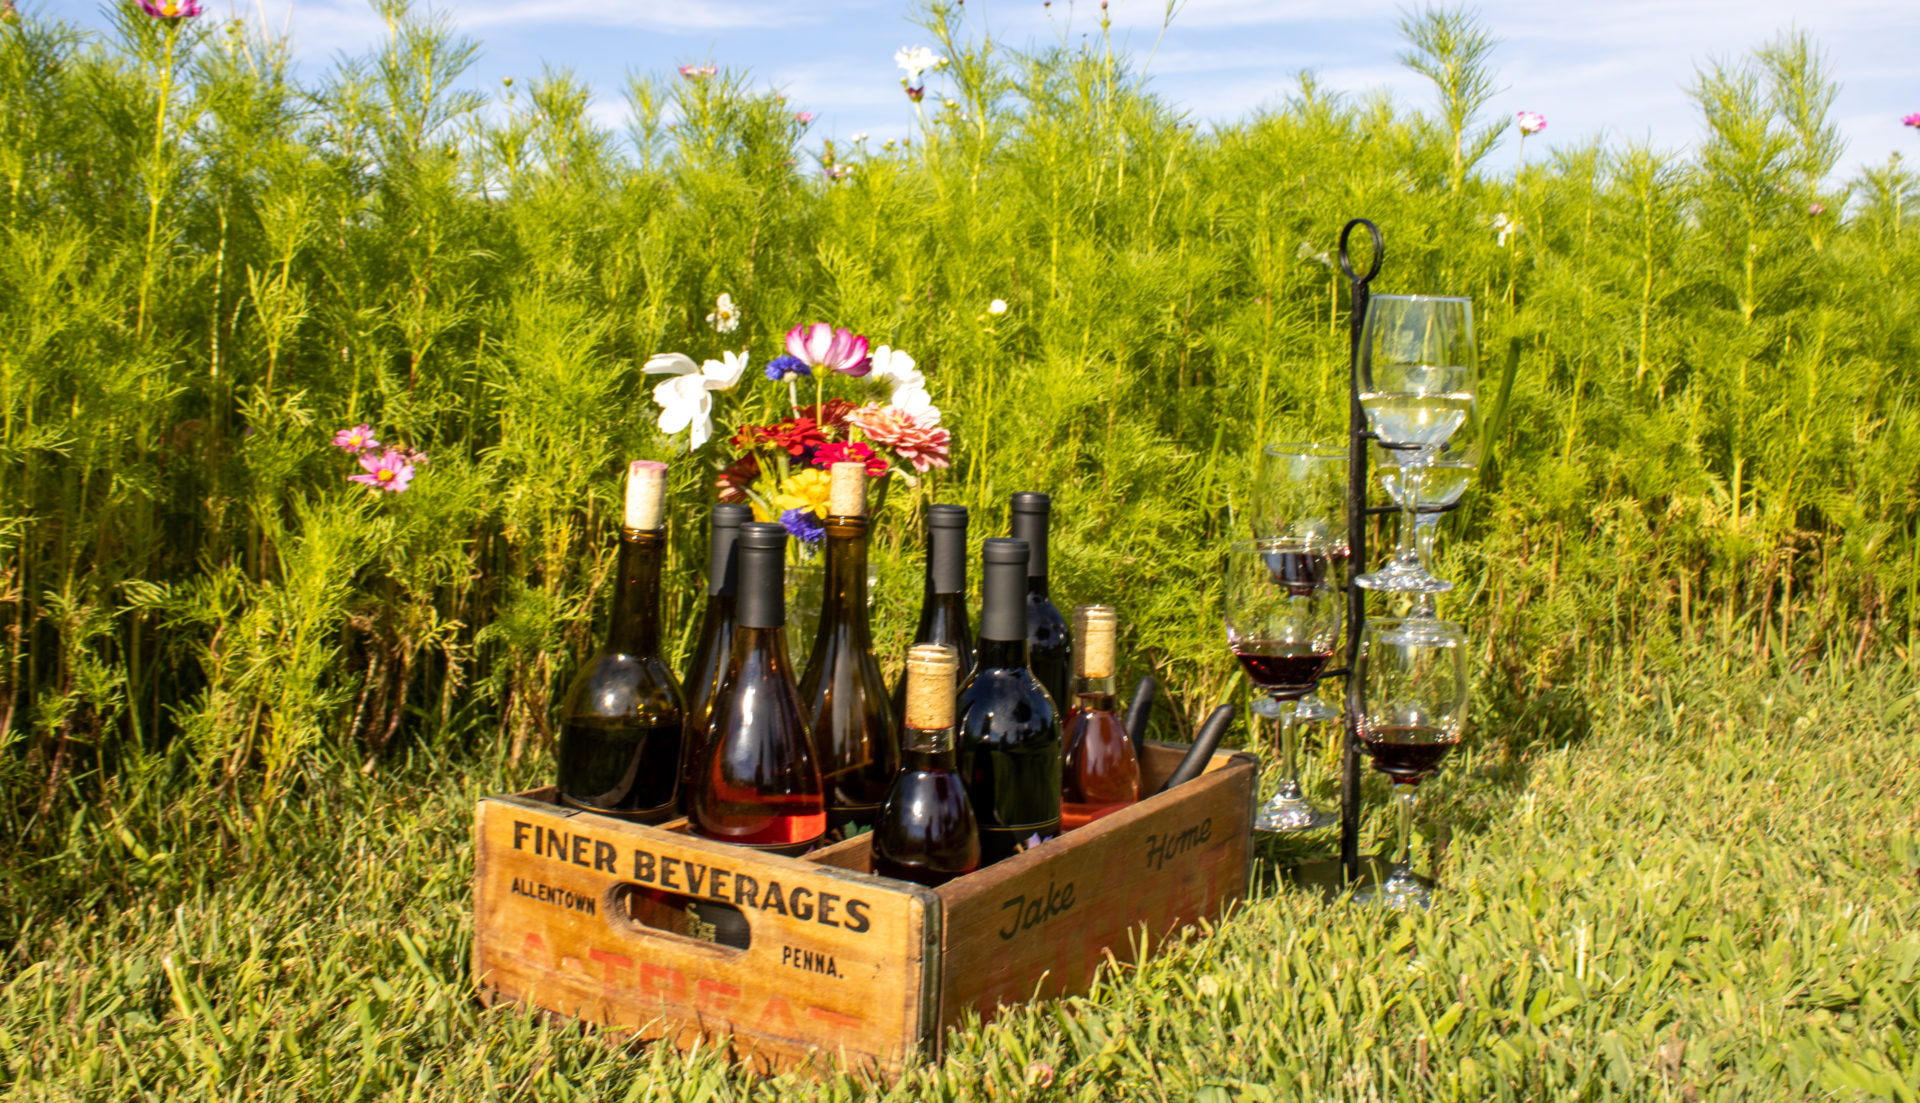 Case of wine next to multiple glasses in the field of flowers